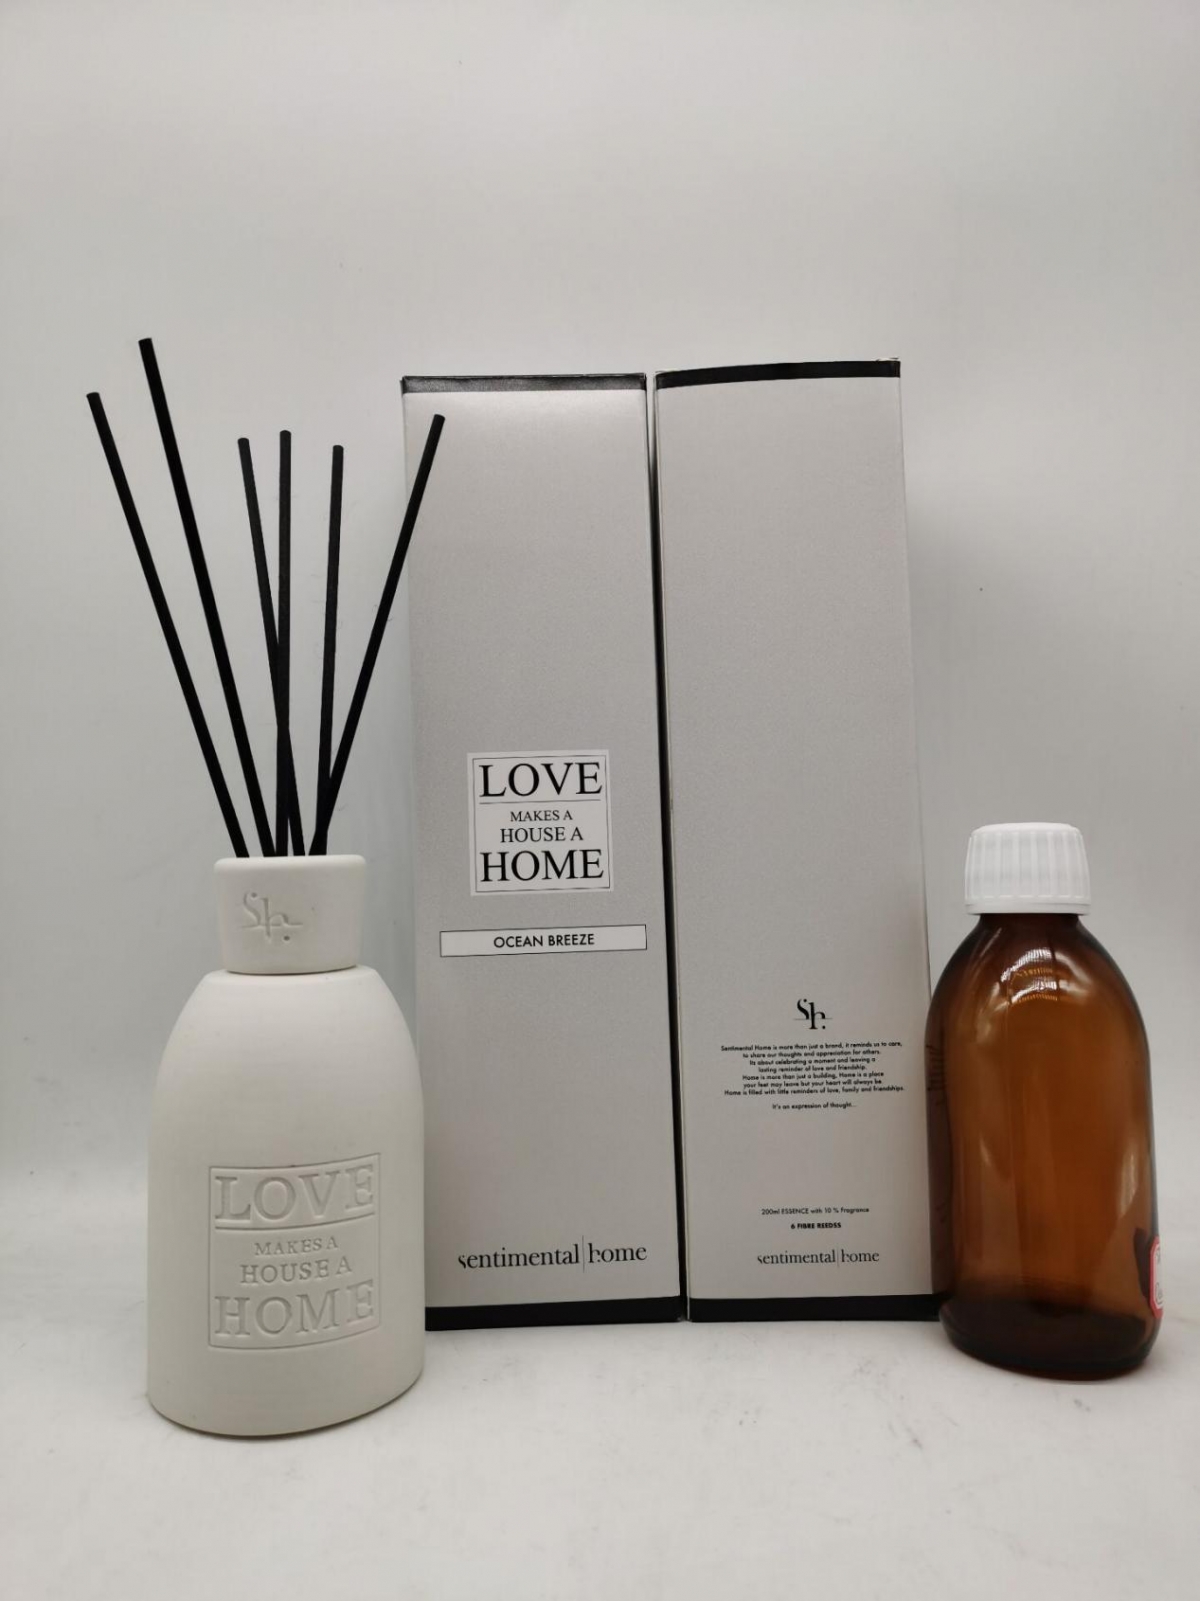 Supply Big Intaglio Ceramic Reed Diffuser Gift Set From China Factory-HOWCANDLE-Scented Candles,Soy Candles,Beeswax Candles,Tea light Candles,Citronella Candles,Tin Candles,Jar Candles,Taper Candles,Pillar Candles,Jo Malone Candles,Gift Set Candles,Wooden Wicks Candles,Tom Ford Candles,Man Candles,Essential Oils,Perfume Oils,Fragrance Oils,Reed Diffuser,Oil Diffusers,Candle Holder,Wax Warmer,